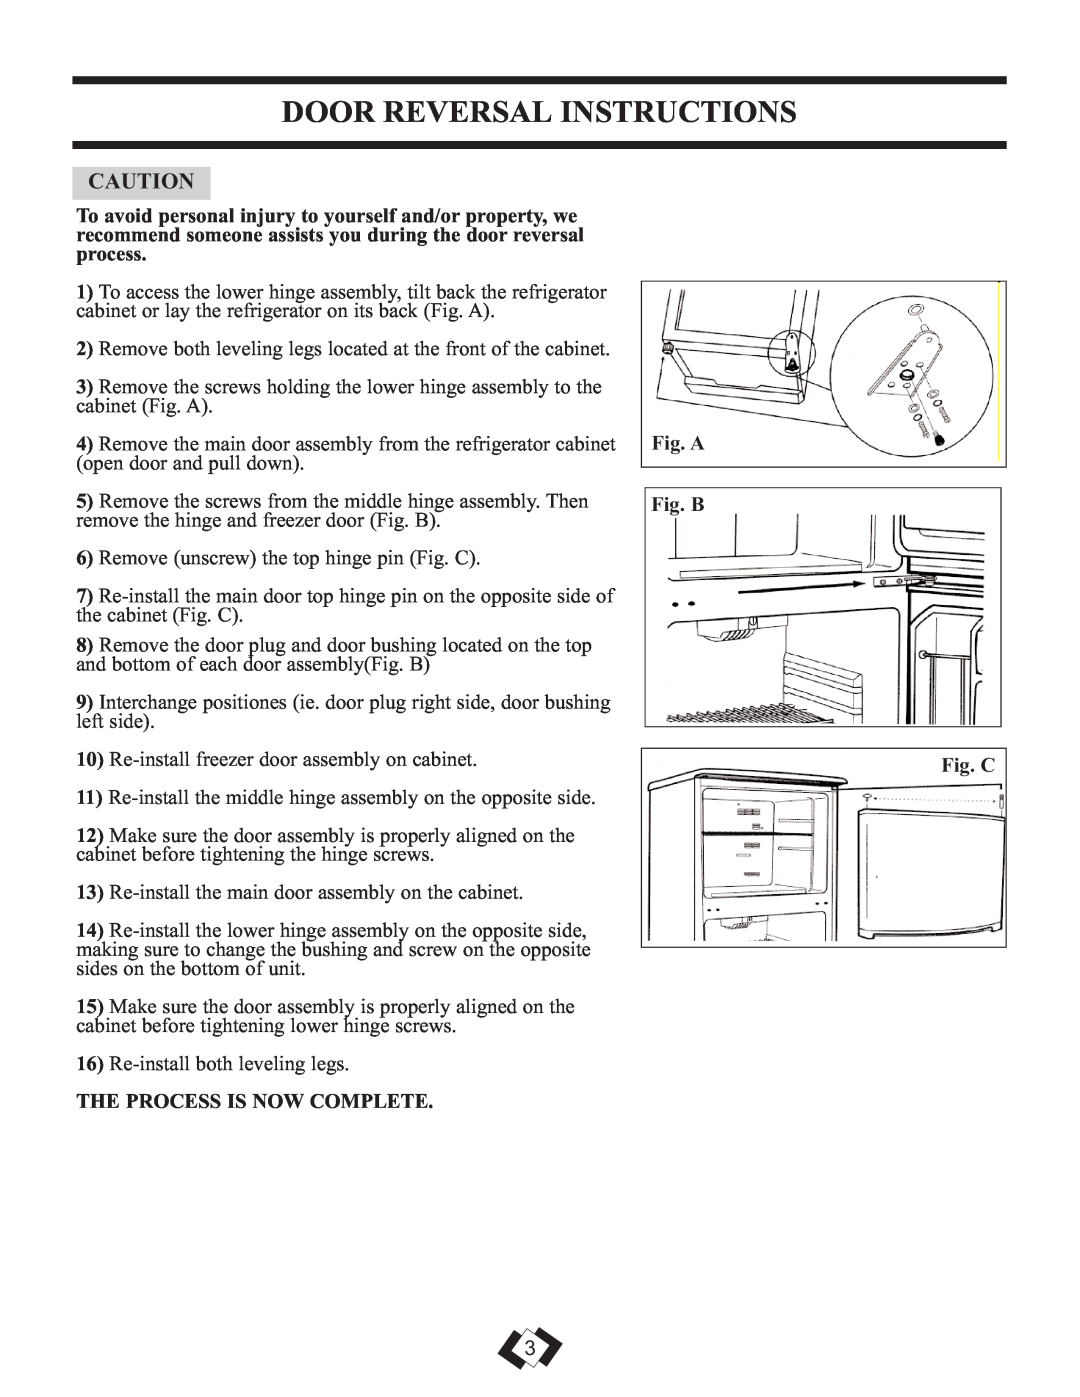 Sunbeam DFF258BLSSB installation instructions Door Reversal Instructions, The Process Is Now Complete, Fig. A Fig. B Fig. C 